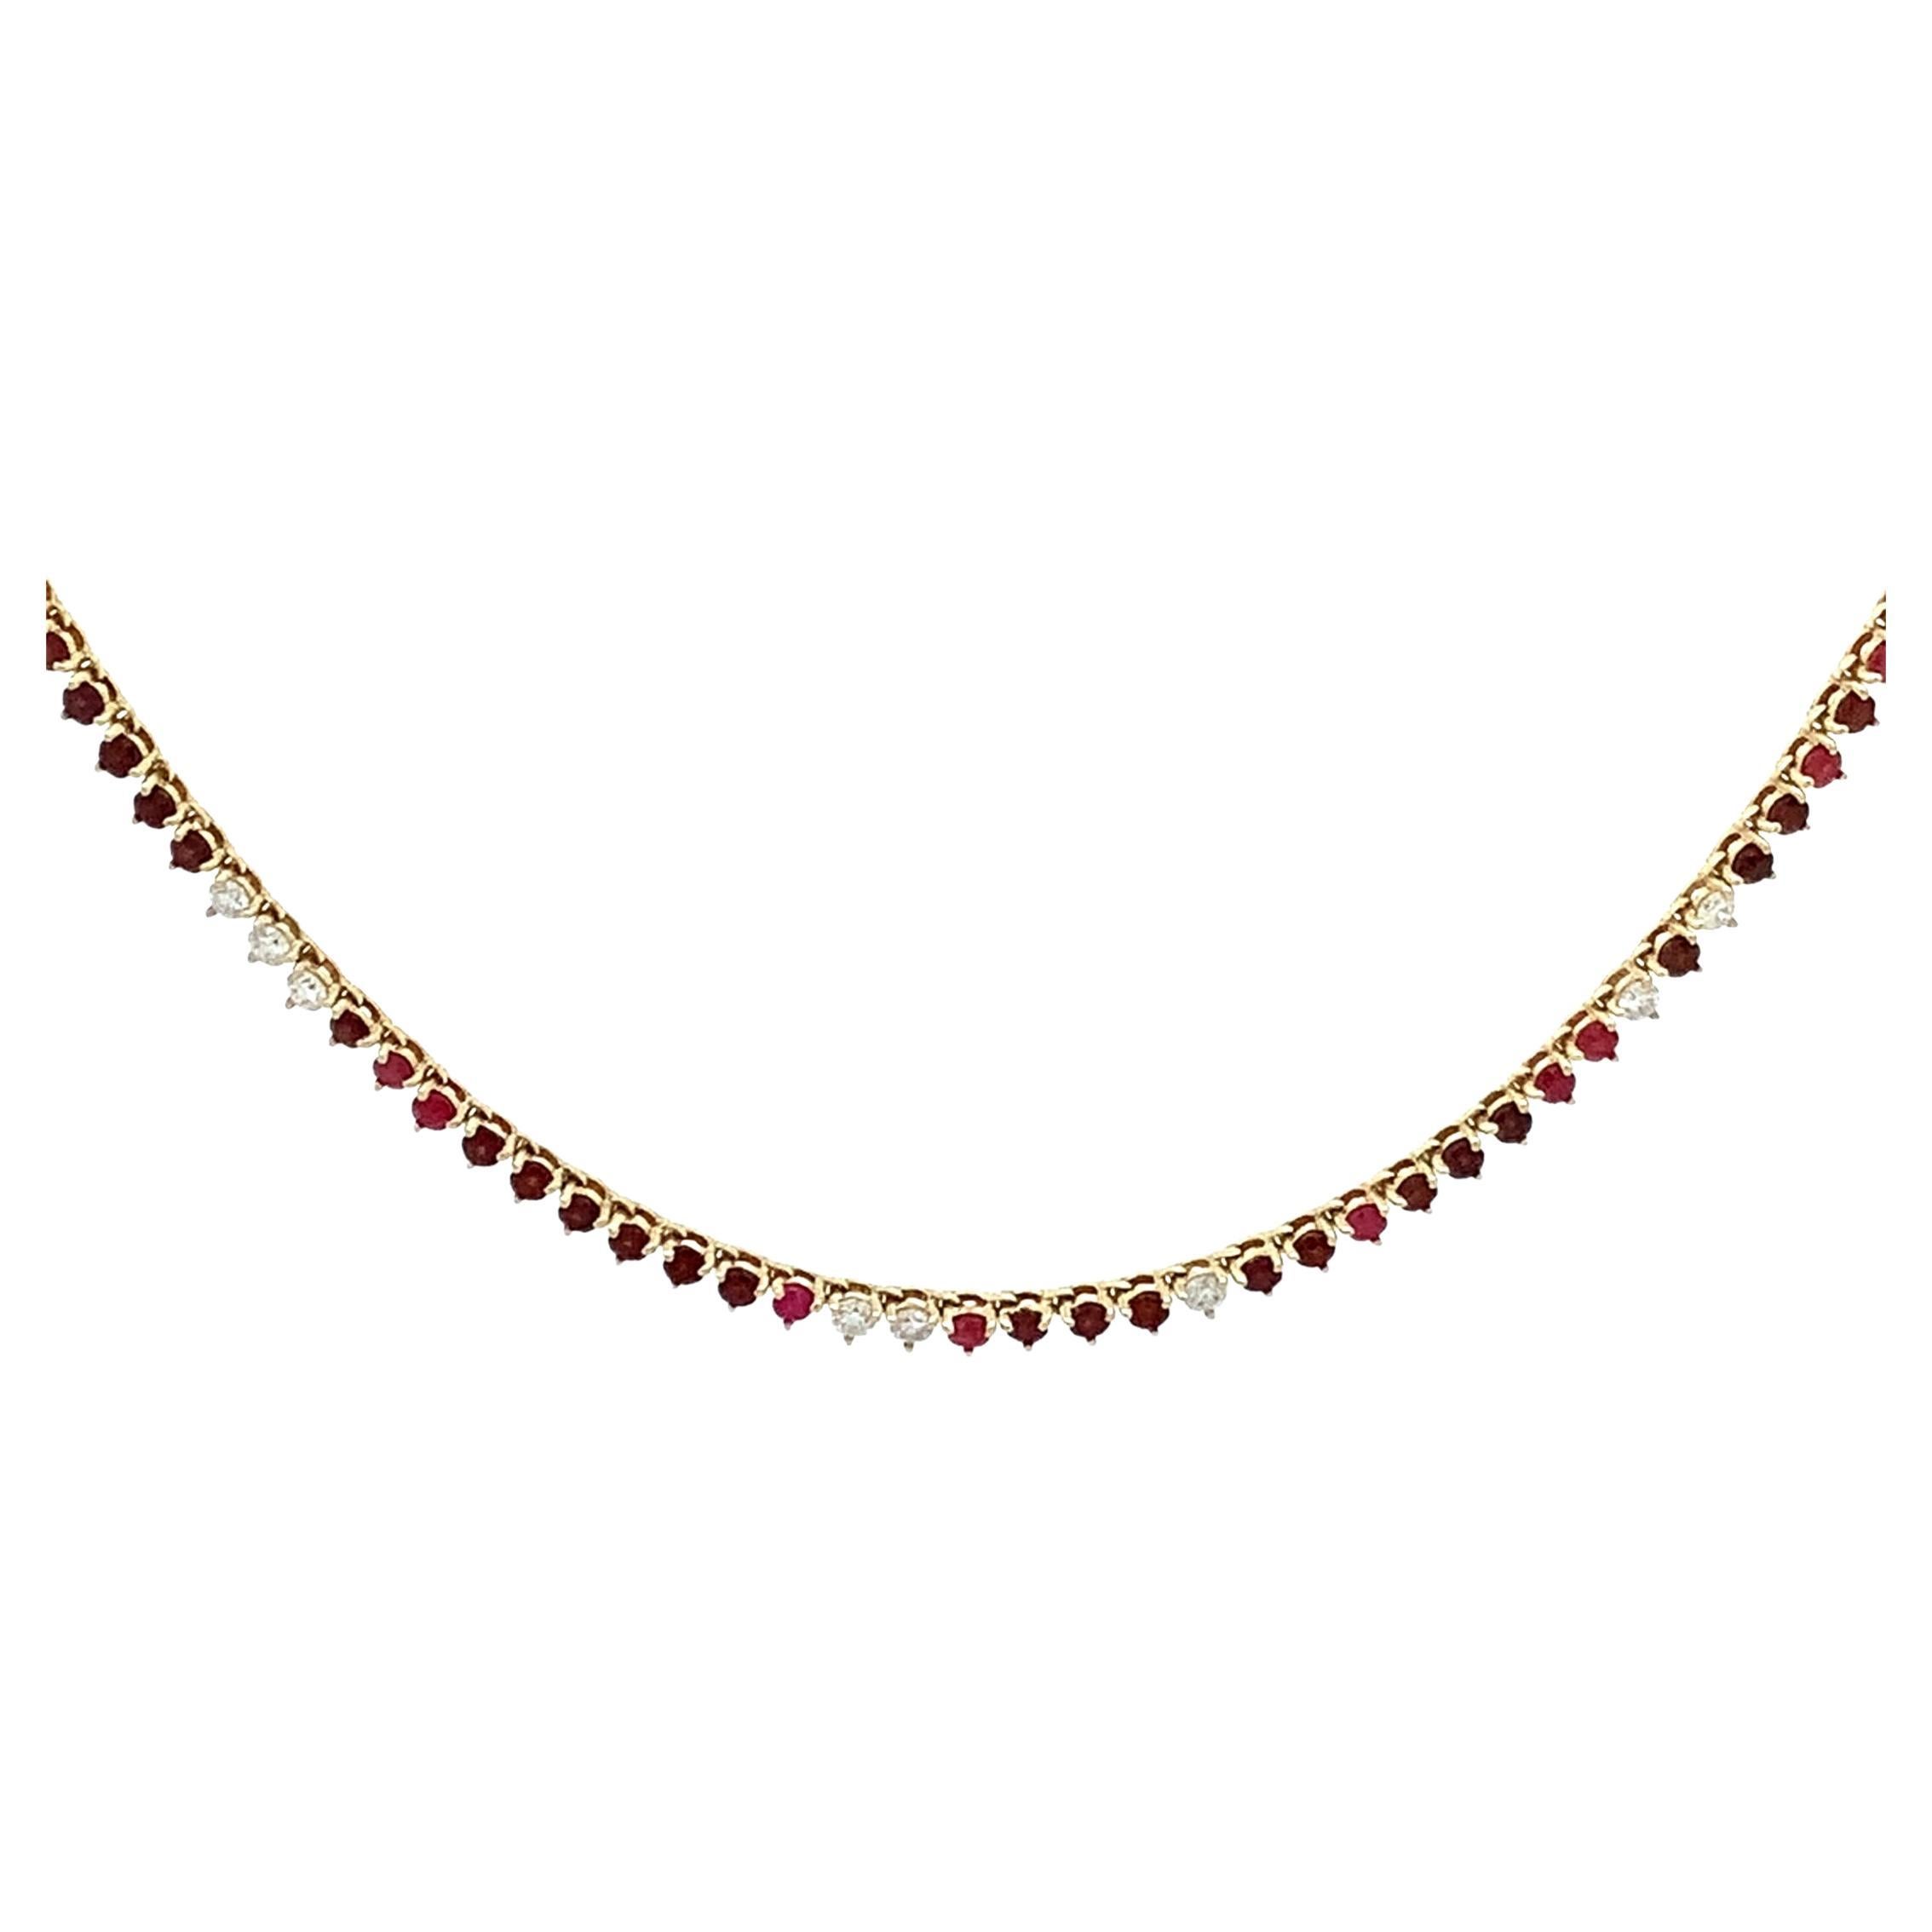 Adina Reyter One of a Kind Ruby, Garnet + Diamond Half Riviera Necklace - Y14

14k yellow gold Riviera necklace with prong-set rubies, garnets, and diamonds. Stones each measure approximately 1.75mm. Adjustable chain with 14-15-16” lengths. 

0.48